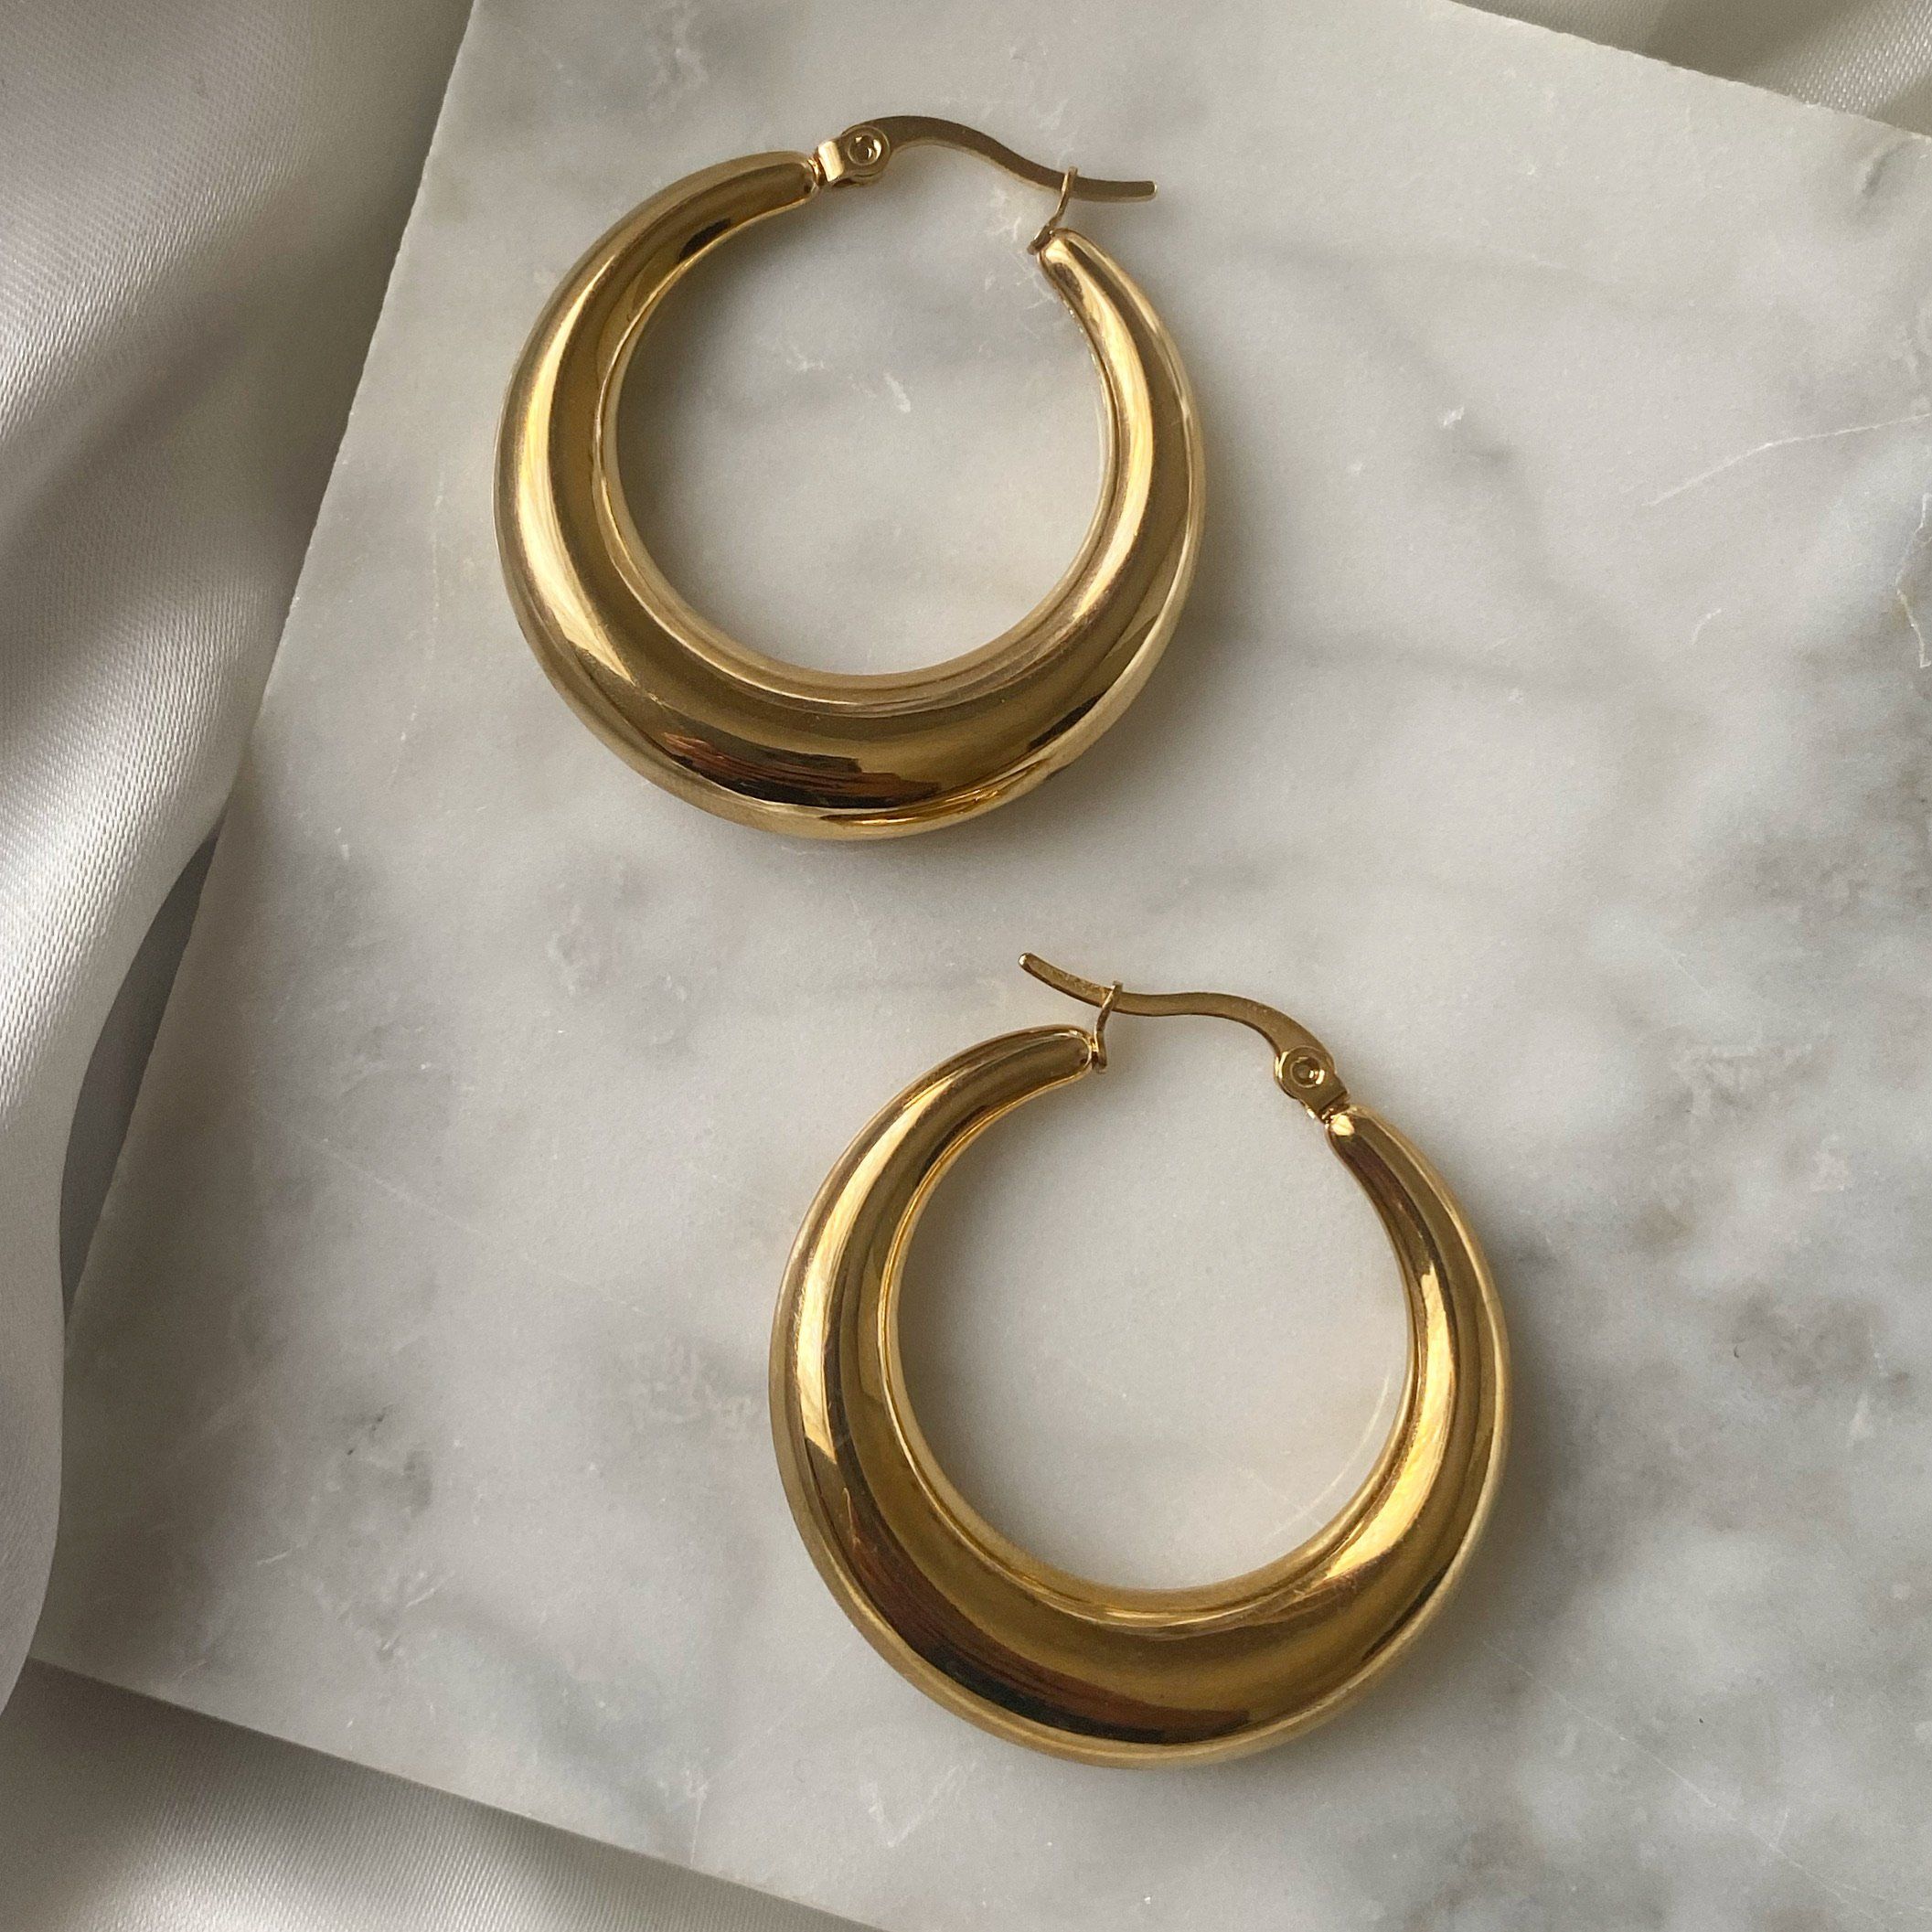 Make your style with gold hoop earrings!